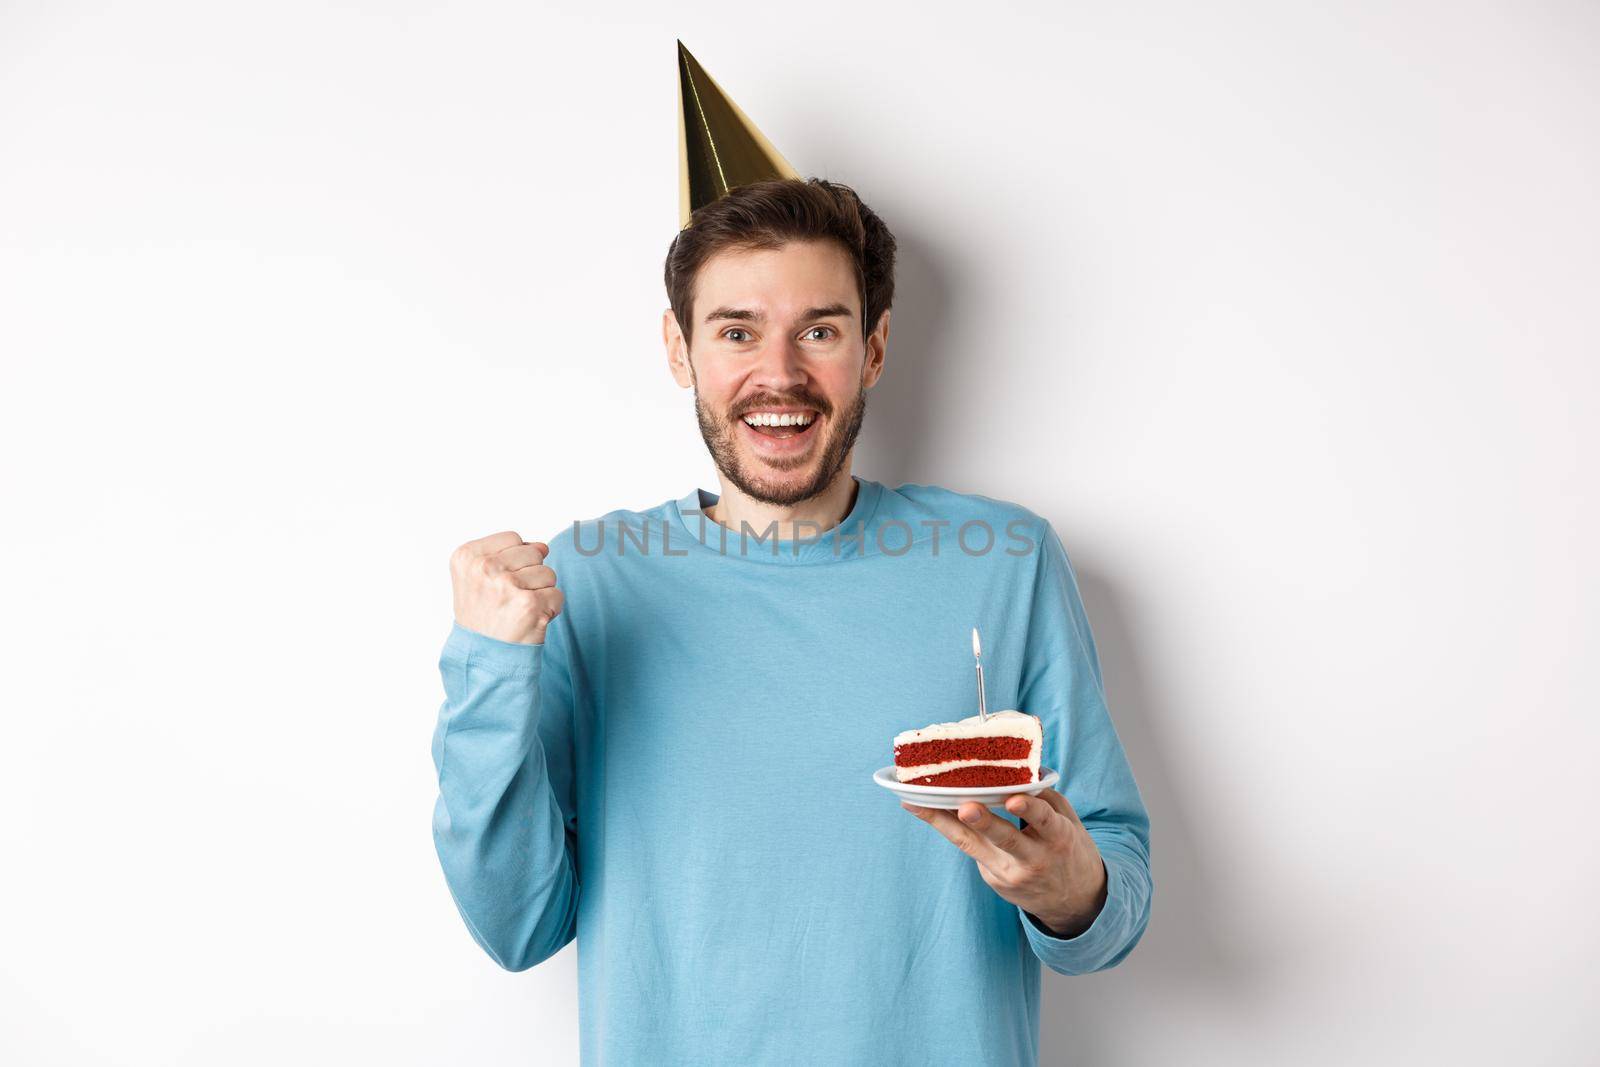 Celebration and holidays concept. Cheerful young man celebrating birthday in party hat, saying yes and fist pump in joy, holding bday cake, white background.